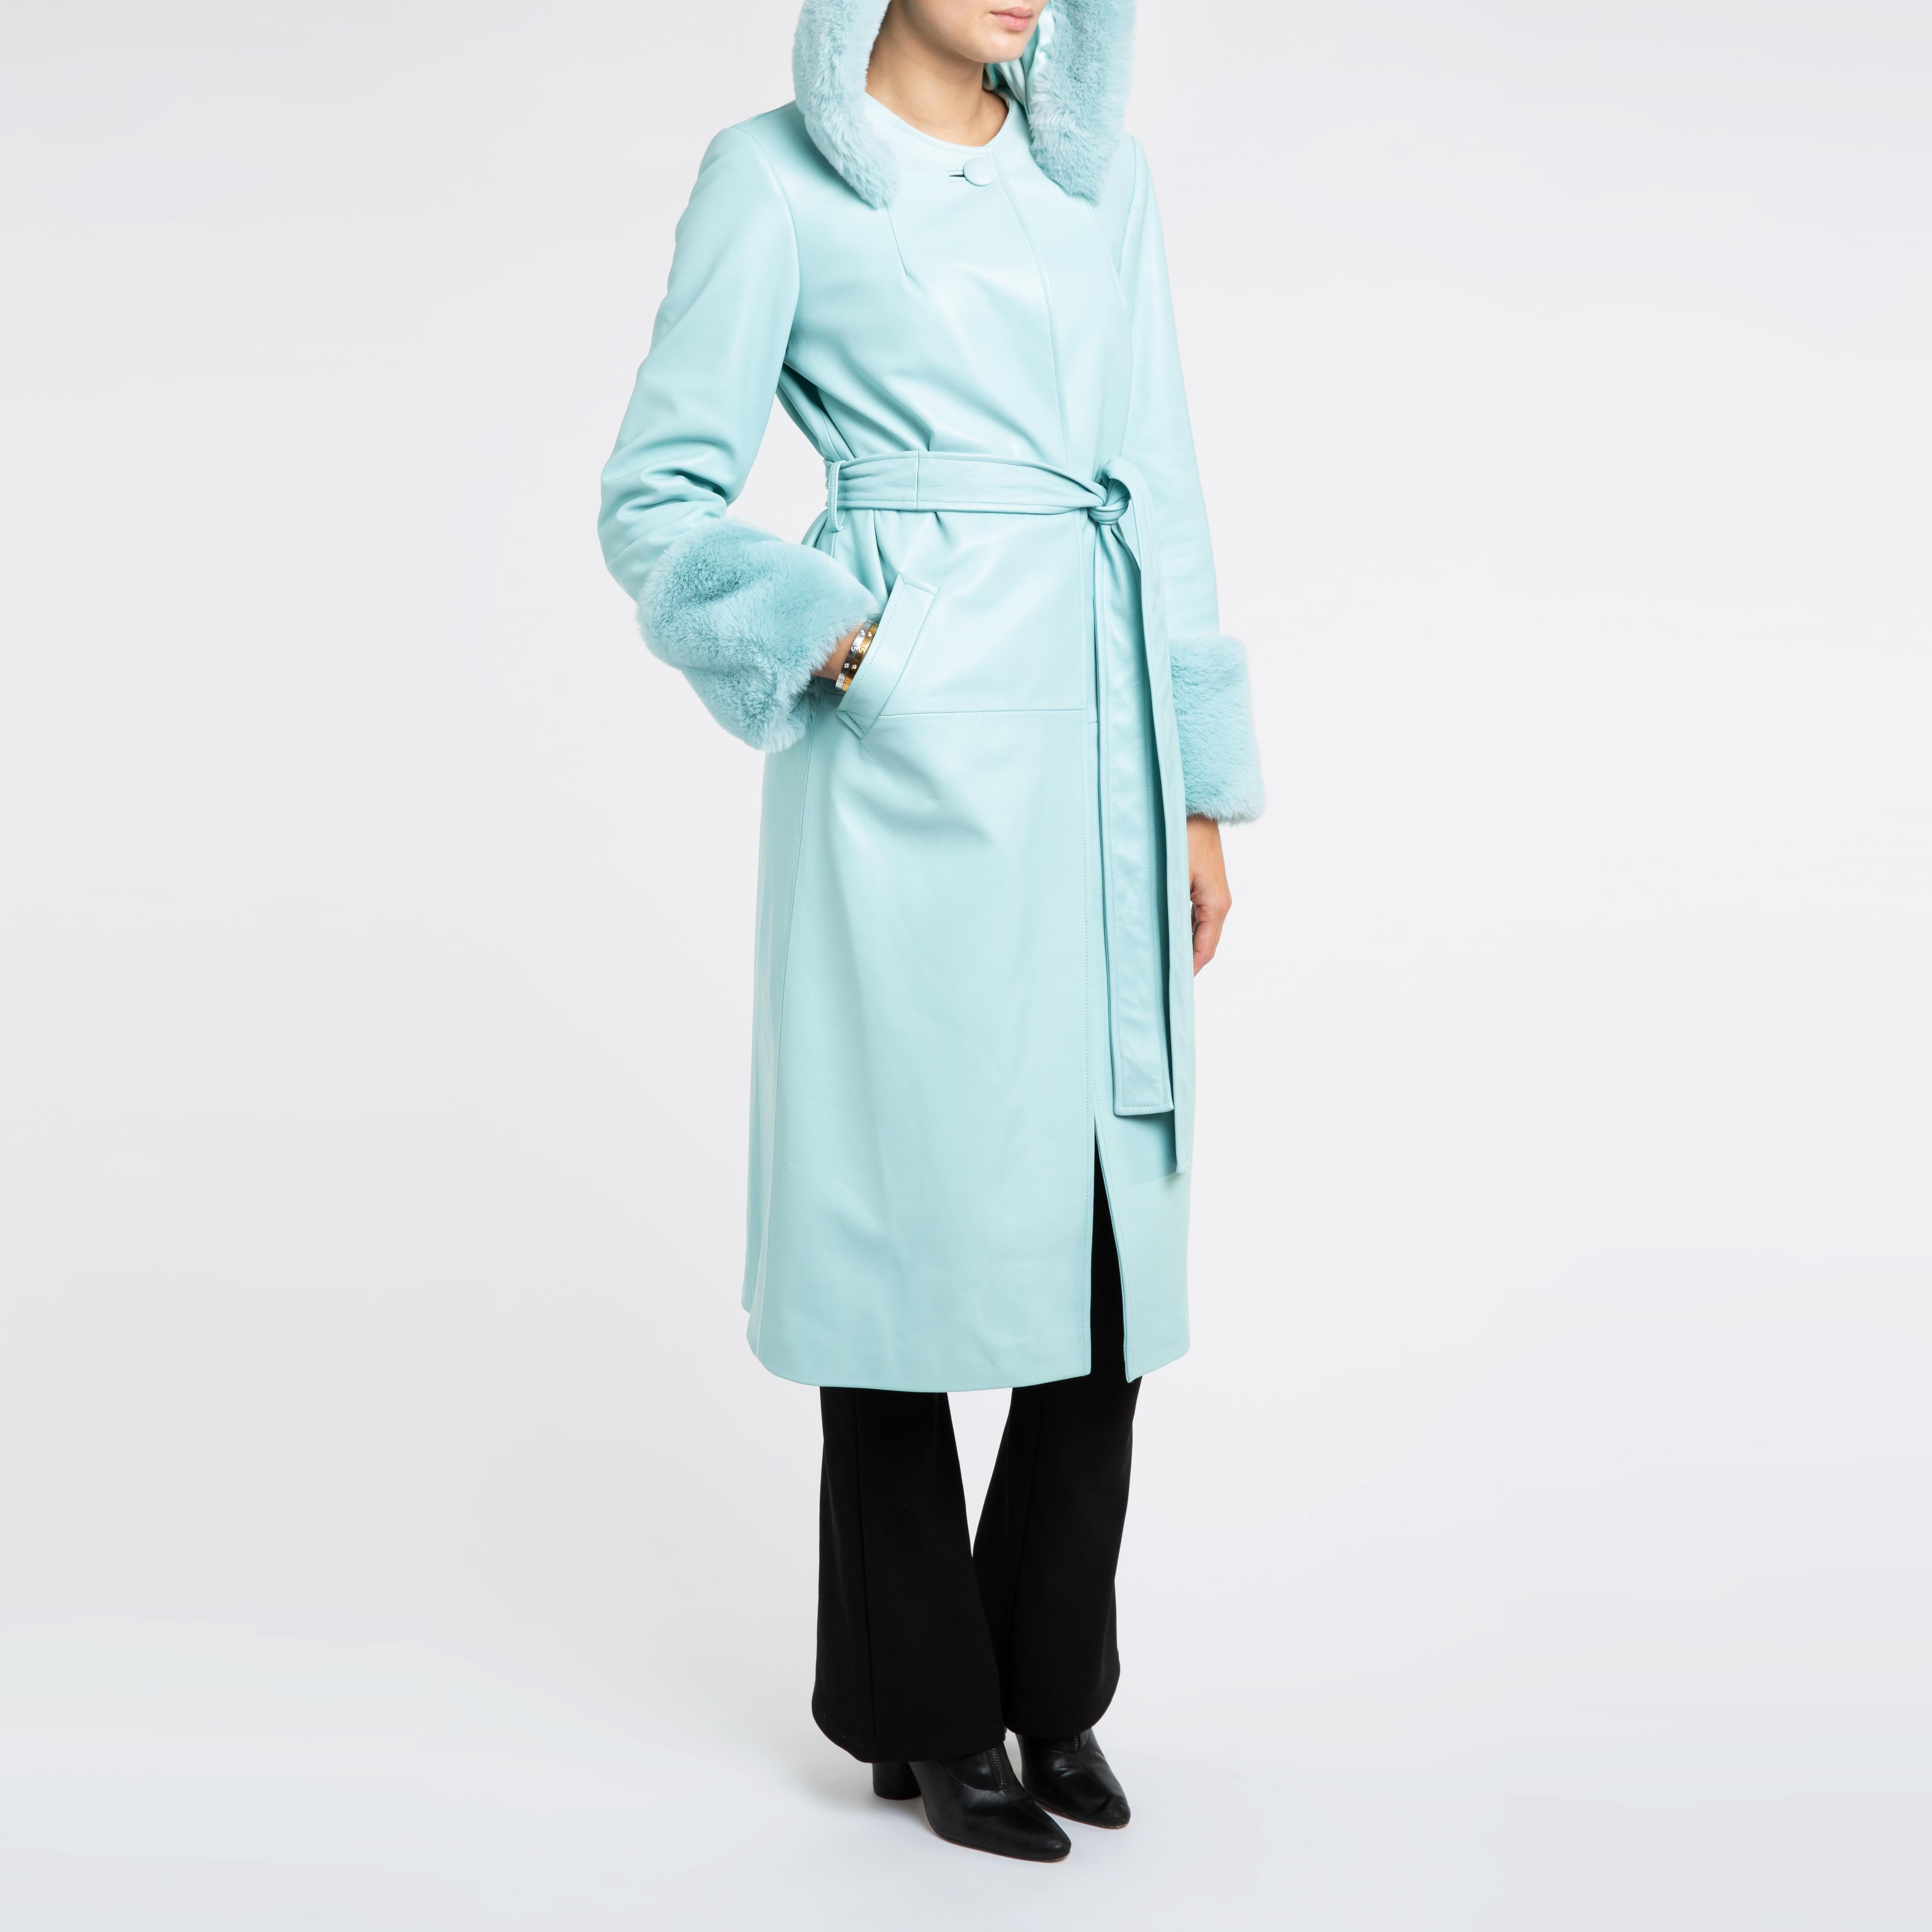 Verheyen London Hooded Leather Coat in Blue Aquamarine & Faux Fur - Size uk 8

Handmade in London, made with 100% Italian Lambs Leather and the highest quality of faux fur to match, this luxury item is an investment piece to wear for a lifetime. 